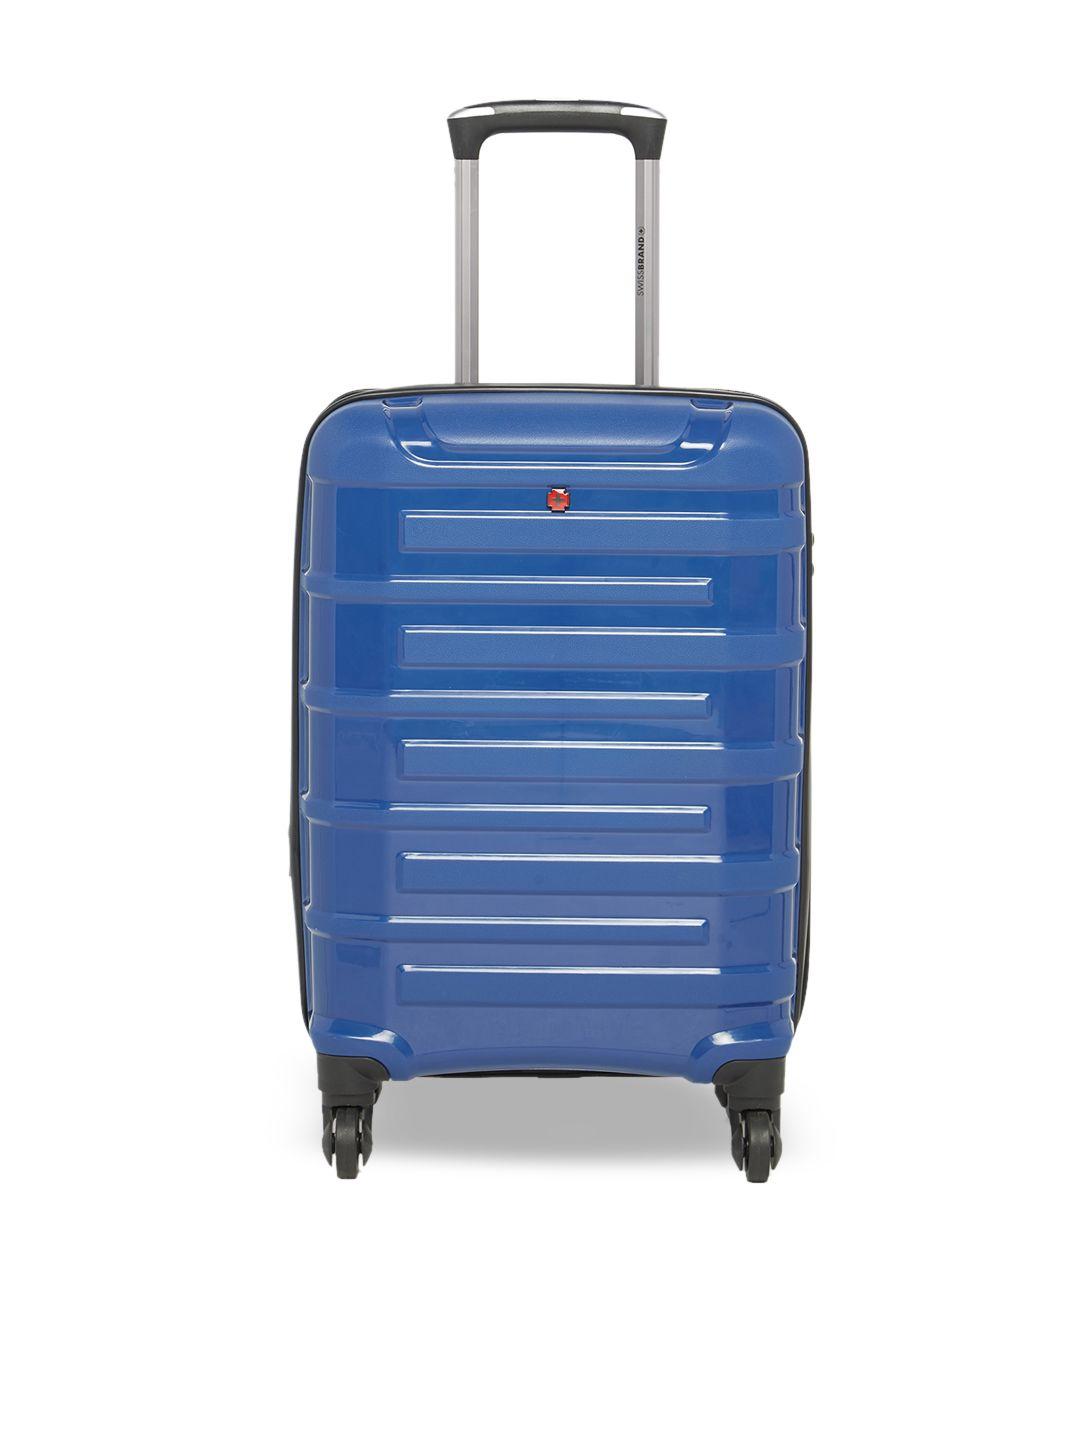 swiss brand sion textured hard-sided cabin trolley bag